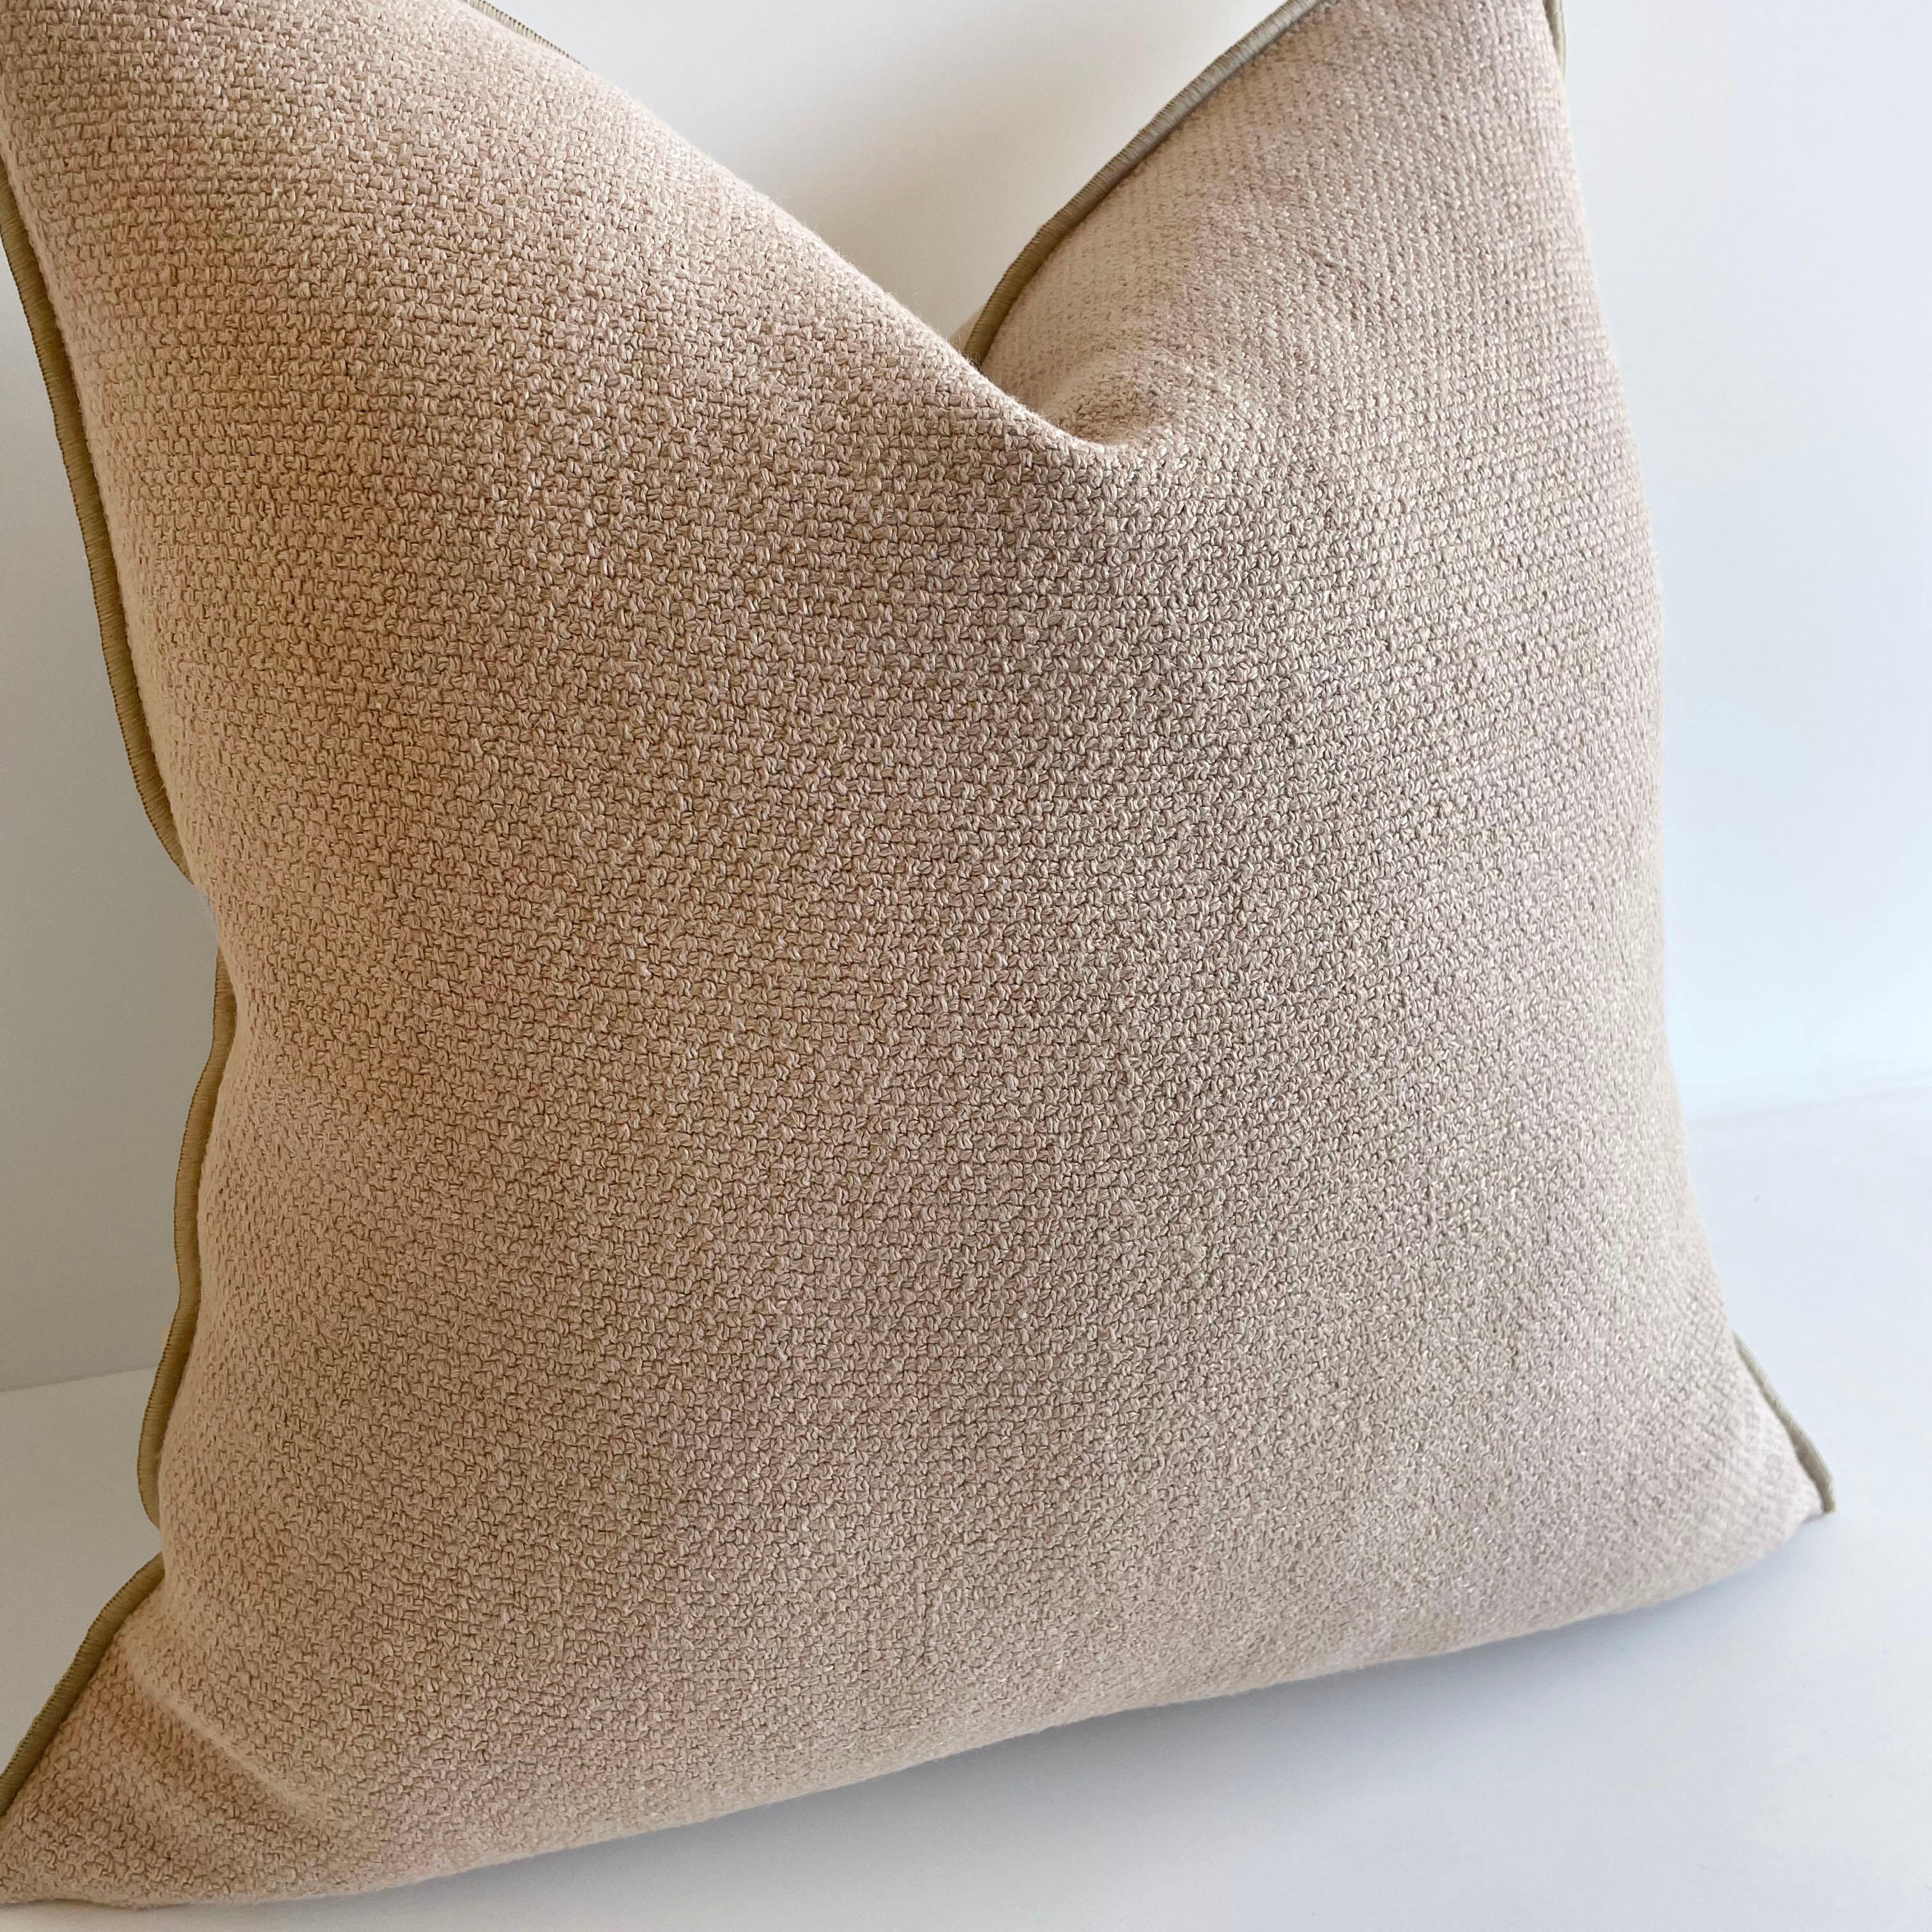 Nude colored linen blend accent pillow. Beautiful nubby soft texture with decorative edge. Metal zipper closure. Includes insert. Limited quantities. Please allow 6-8 weeks for production. 
Color: Nude
Size: 20